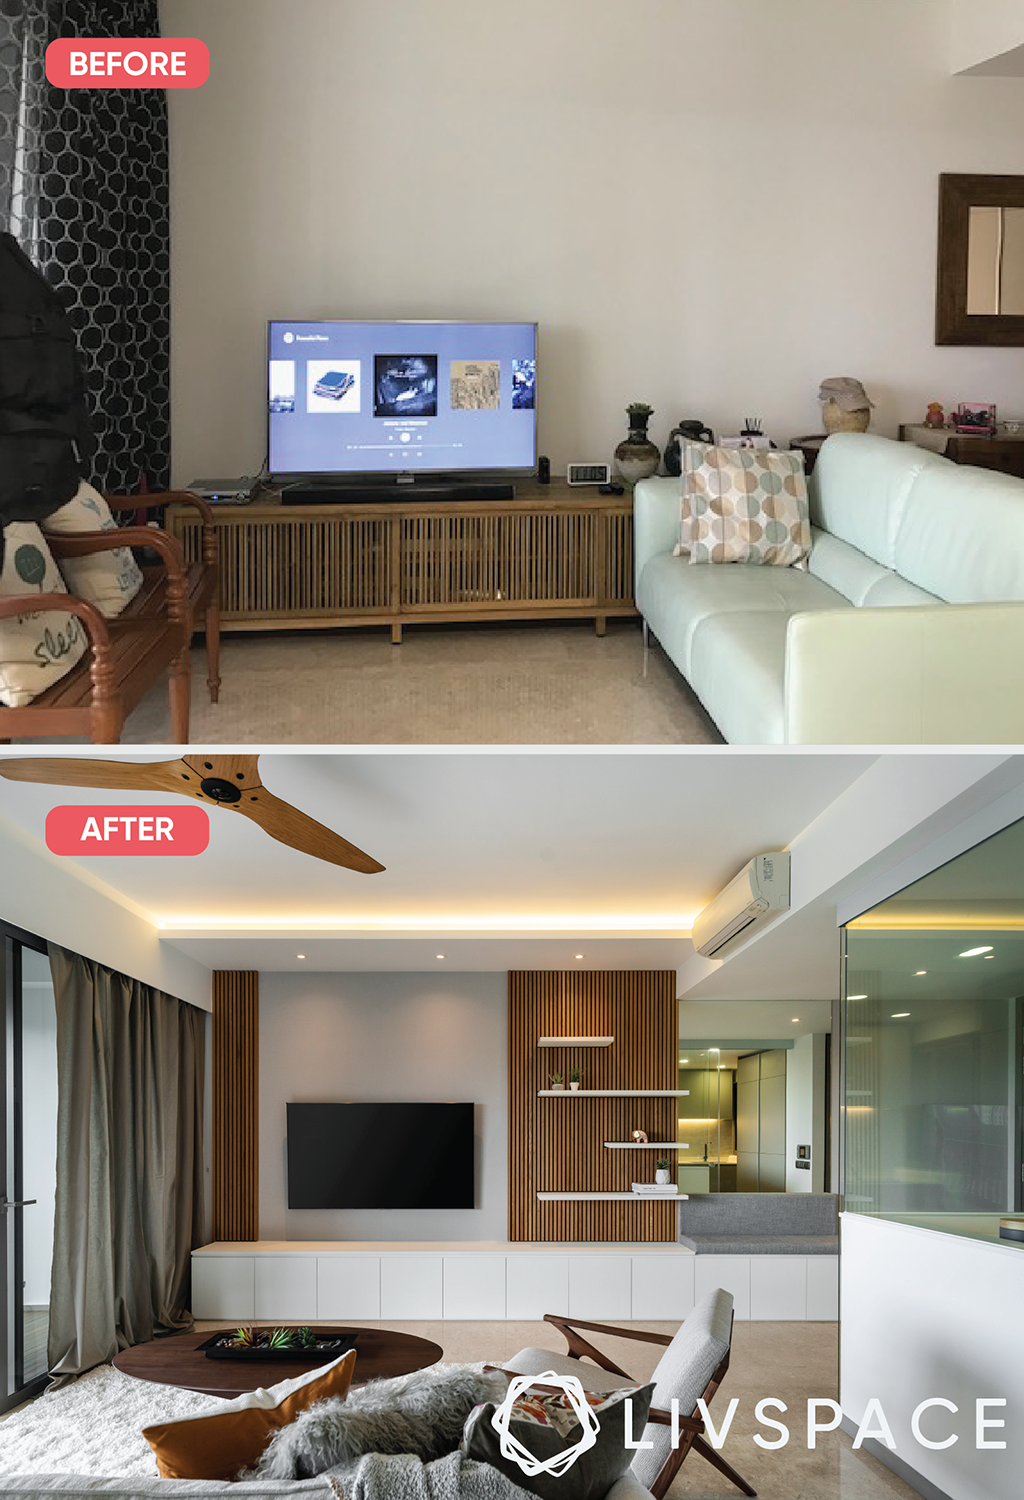 renovate-tv-feature-wall-before-after-wooden-panel